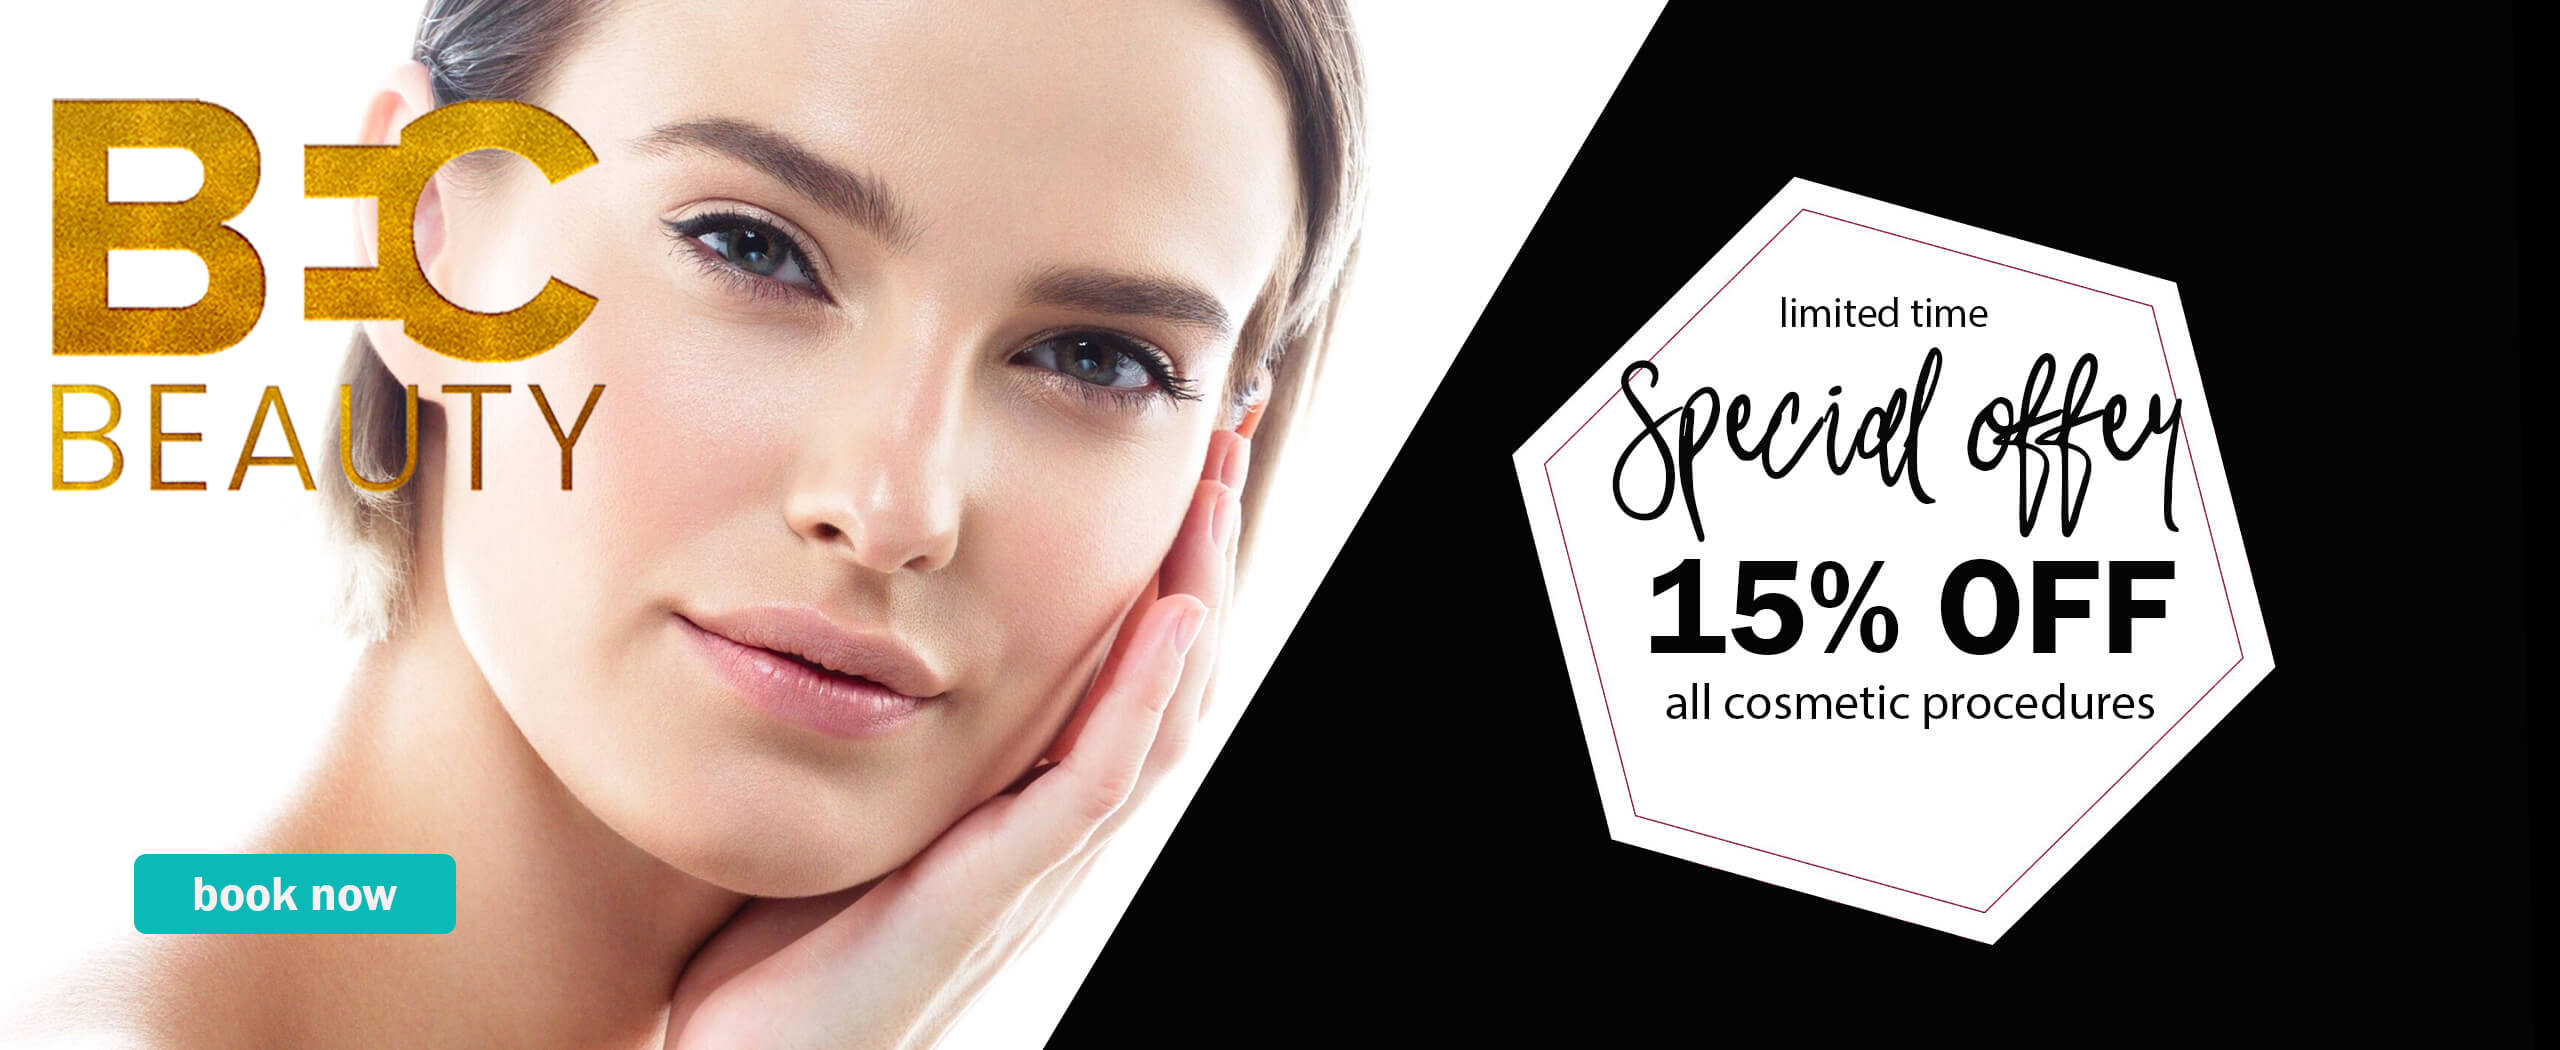 BEC Beauty Special Offer Limited Time Banner